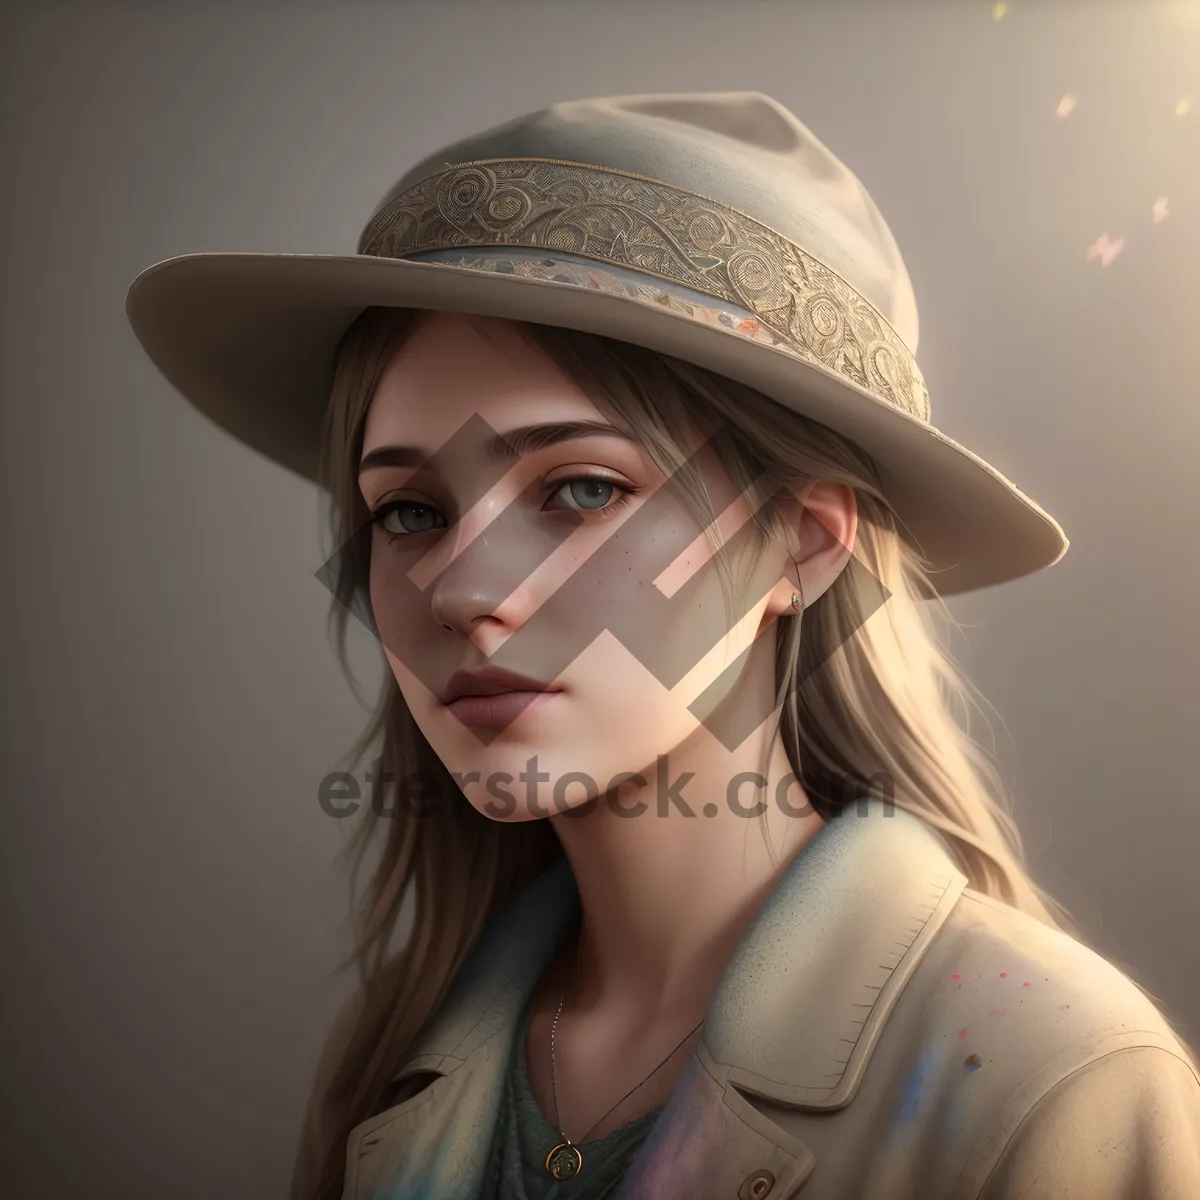 Picture of Stylish Smiling Lady with Cowboy Hat